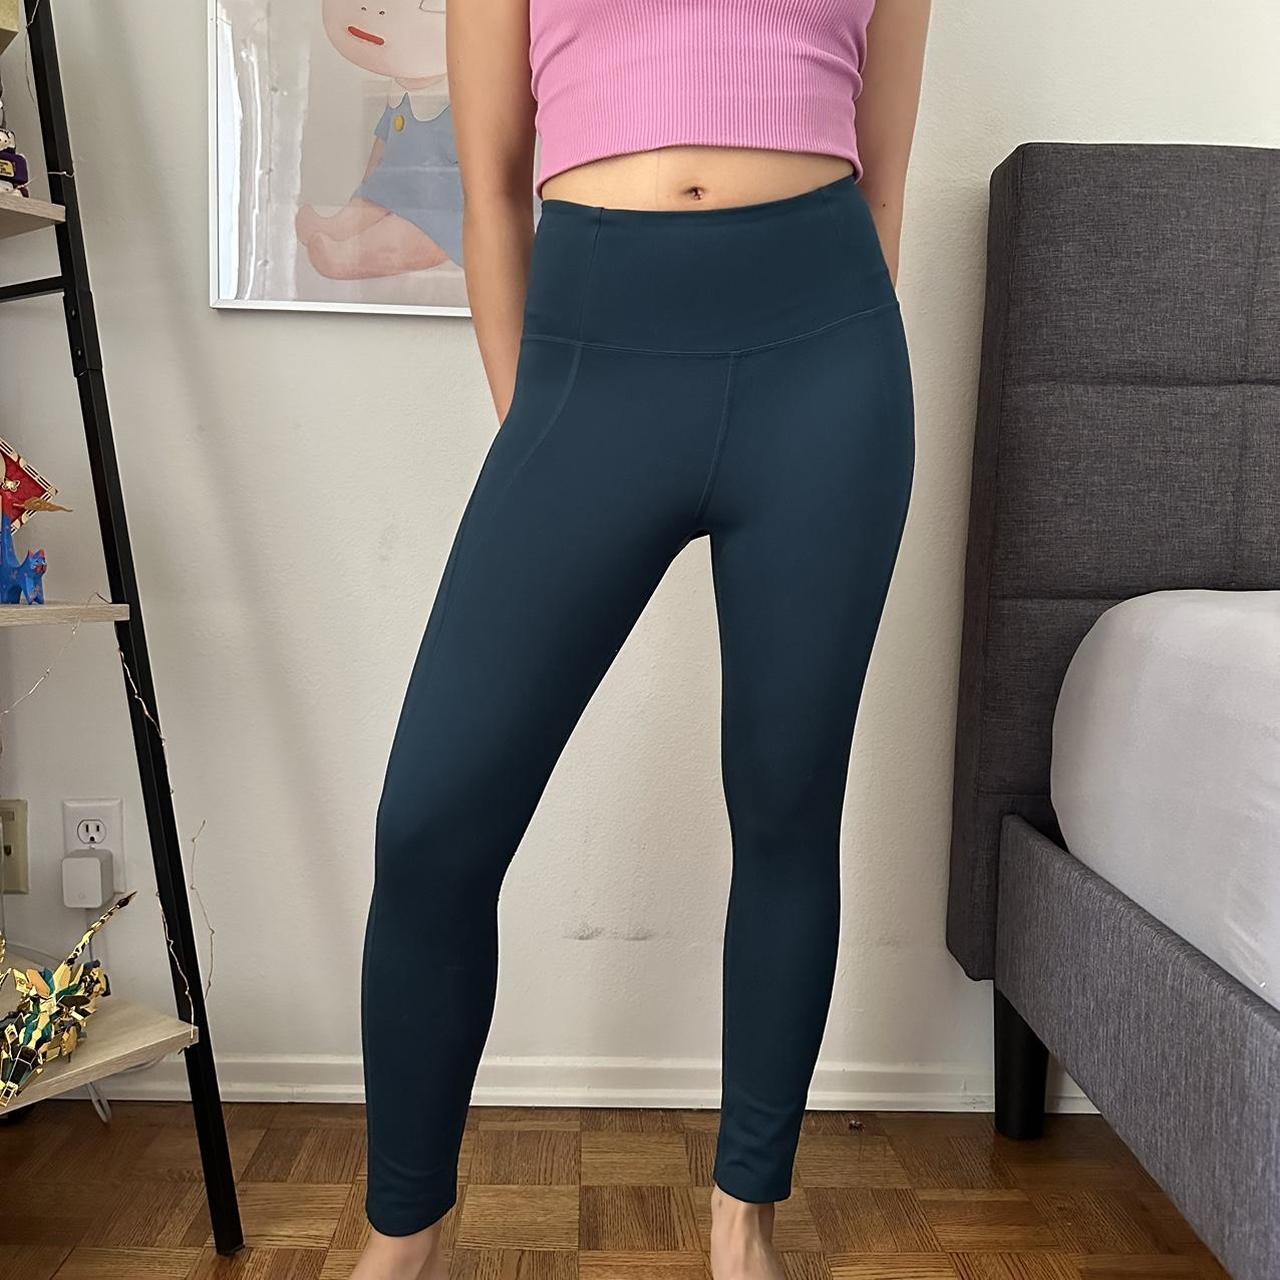 Girlfriend collective leggings in the globe color - Depop